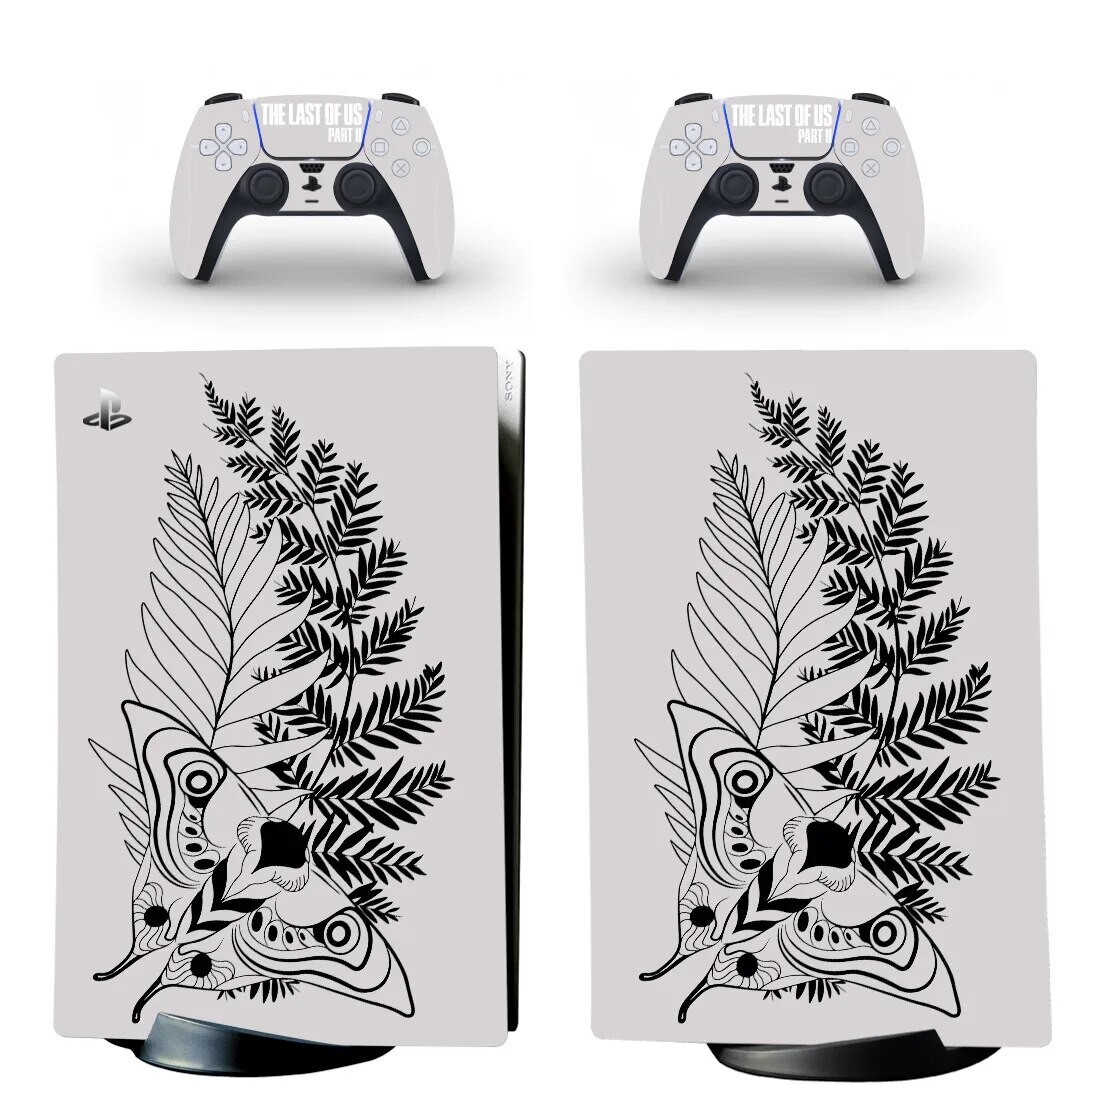 【Wireless】 The Last Of Ps5 Digital Edition Skin Sticker Decal Cover For 5 Console And Controllers Ps5 Skin Sticker